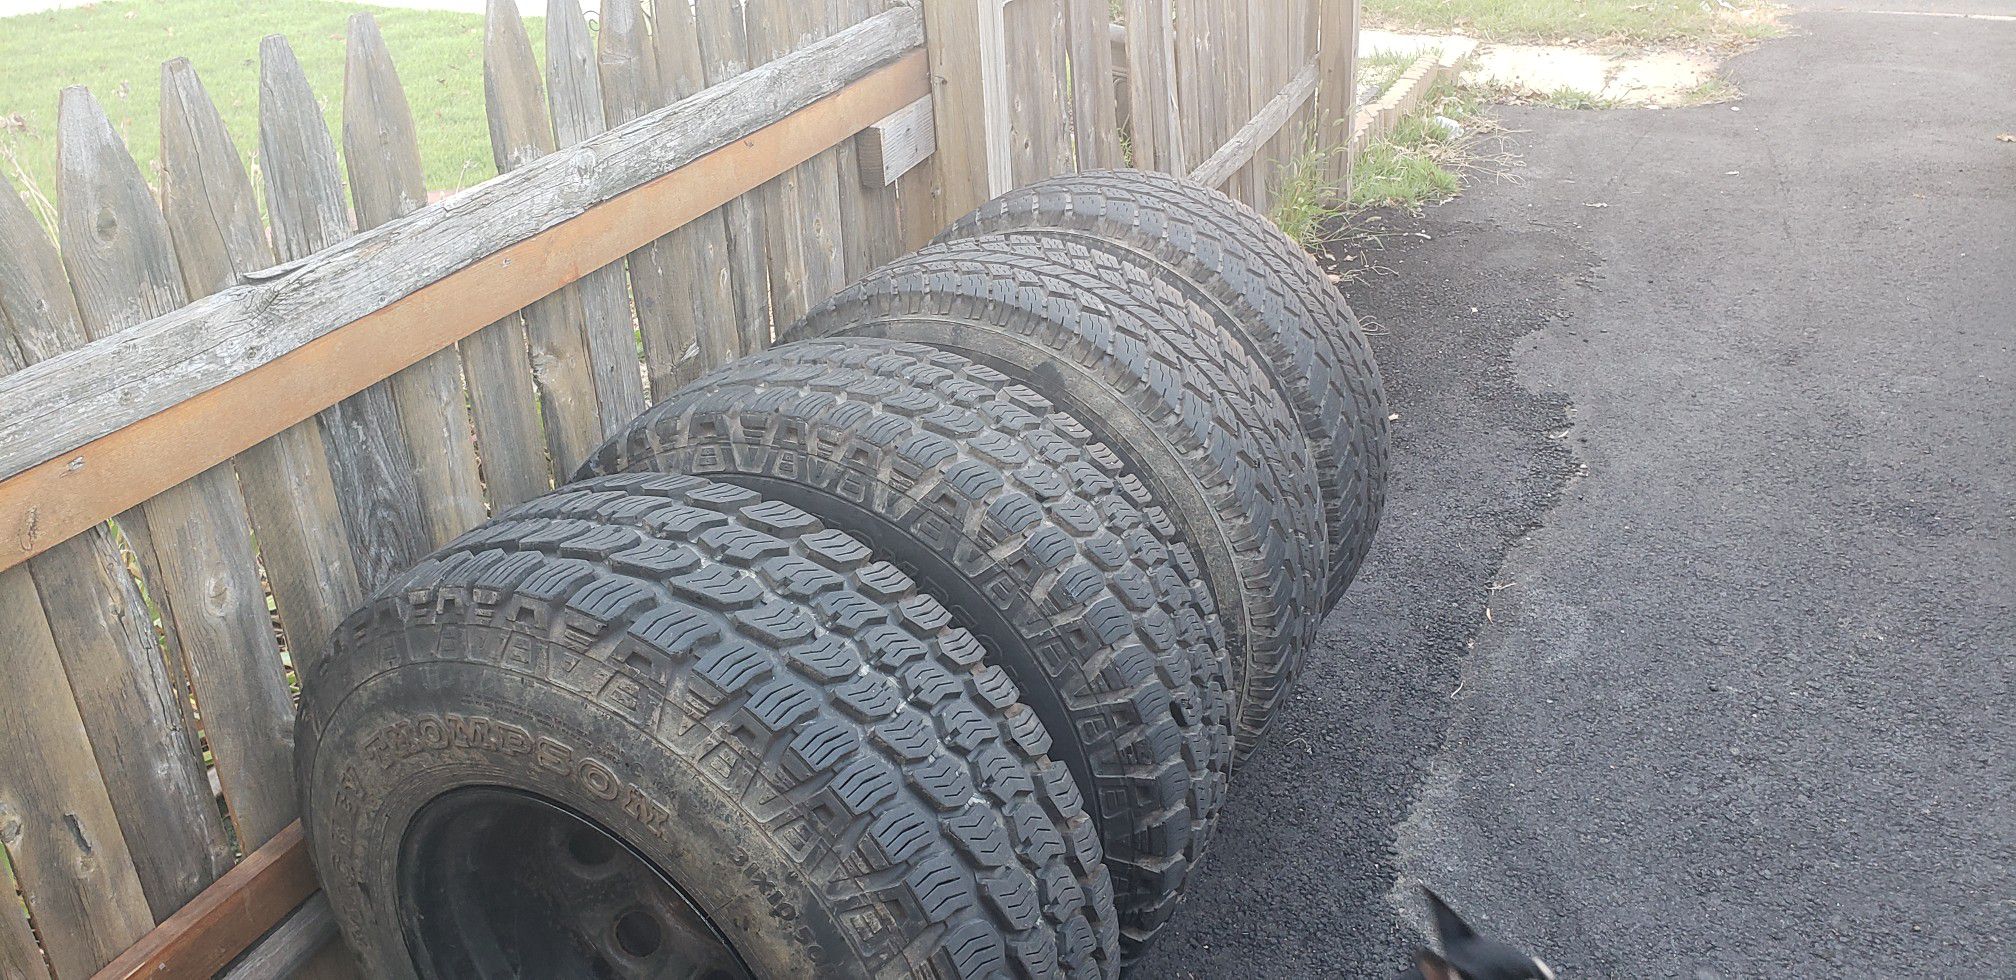 Jeep tires and rims